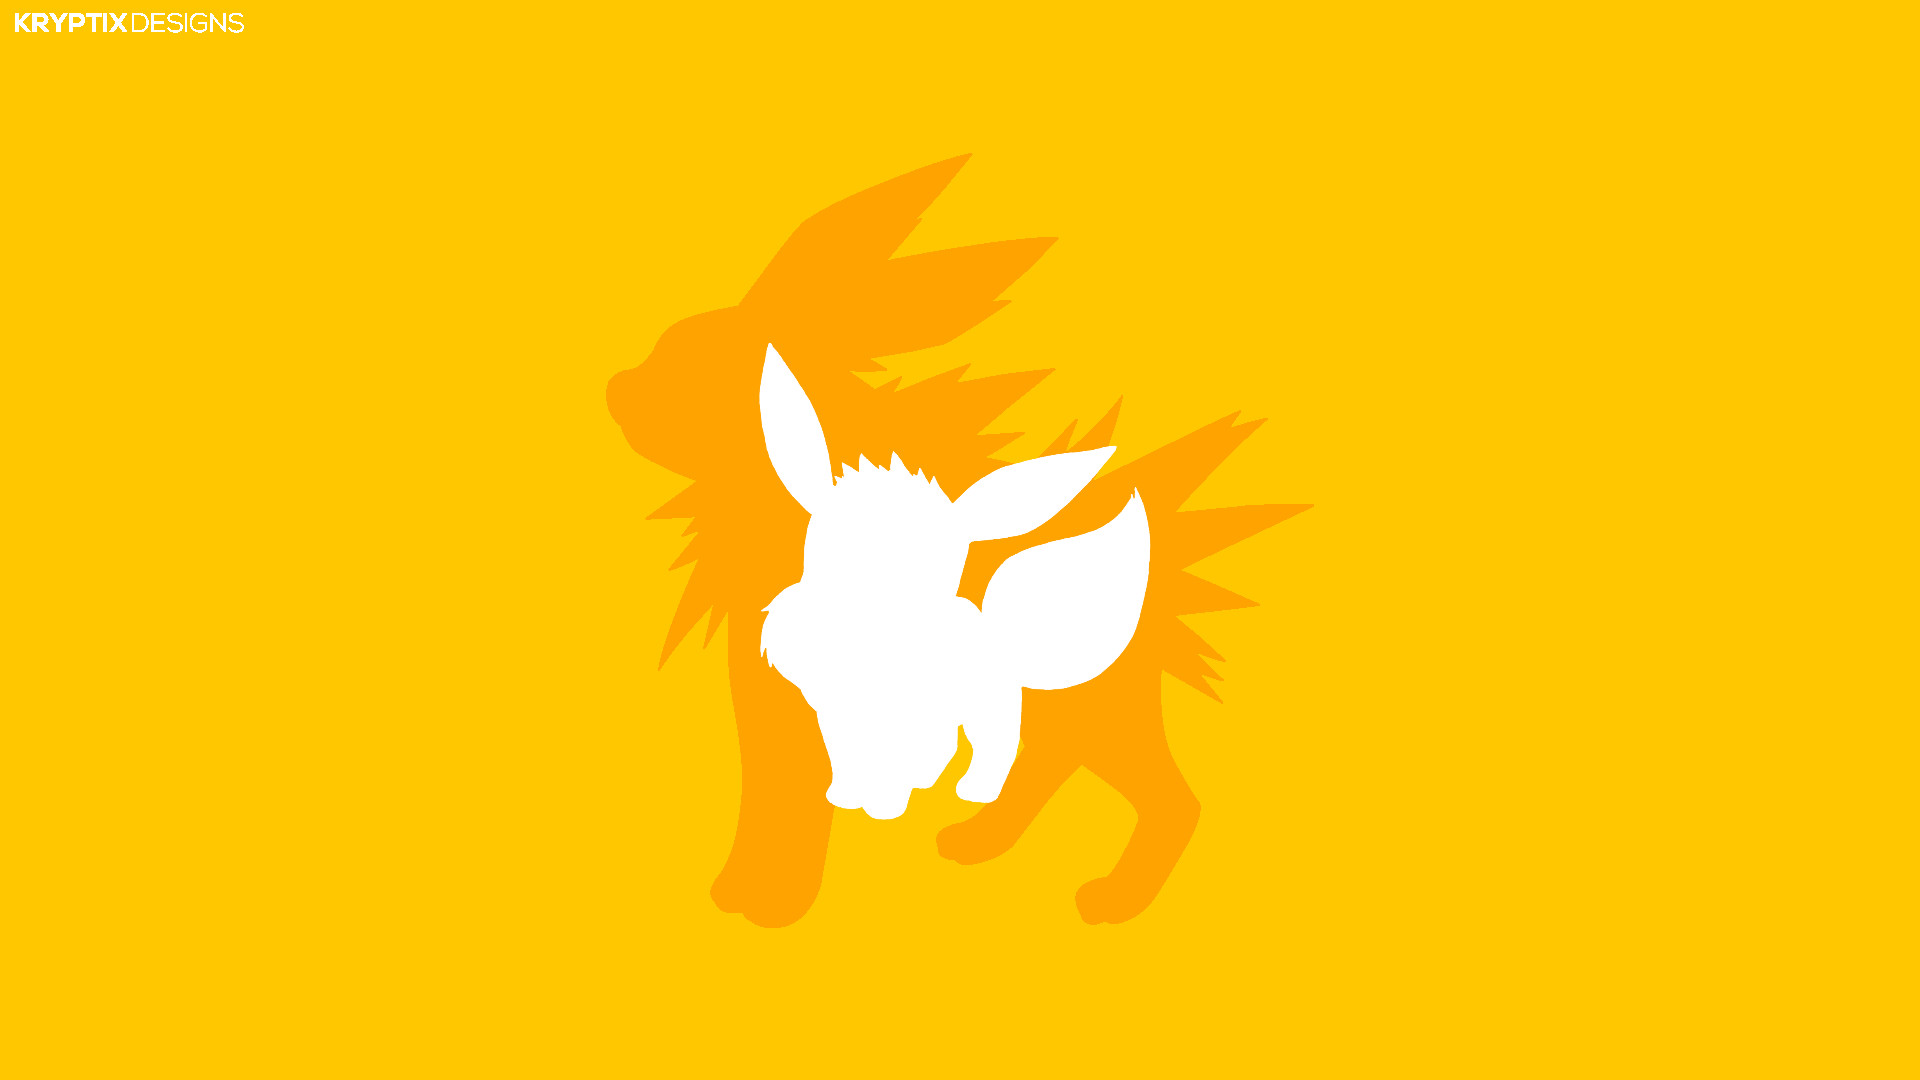 All Eeveelutions Wallpapers HD by KryptixDesigns All Eeveelutions Wallpapers HD by KryptixDesigns